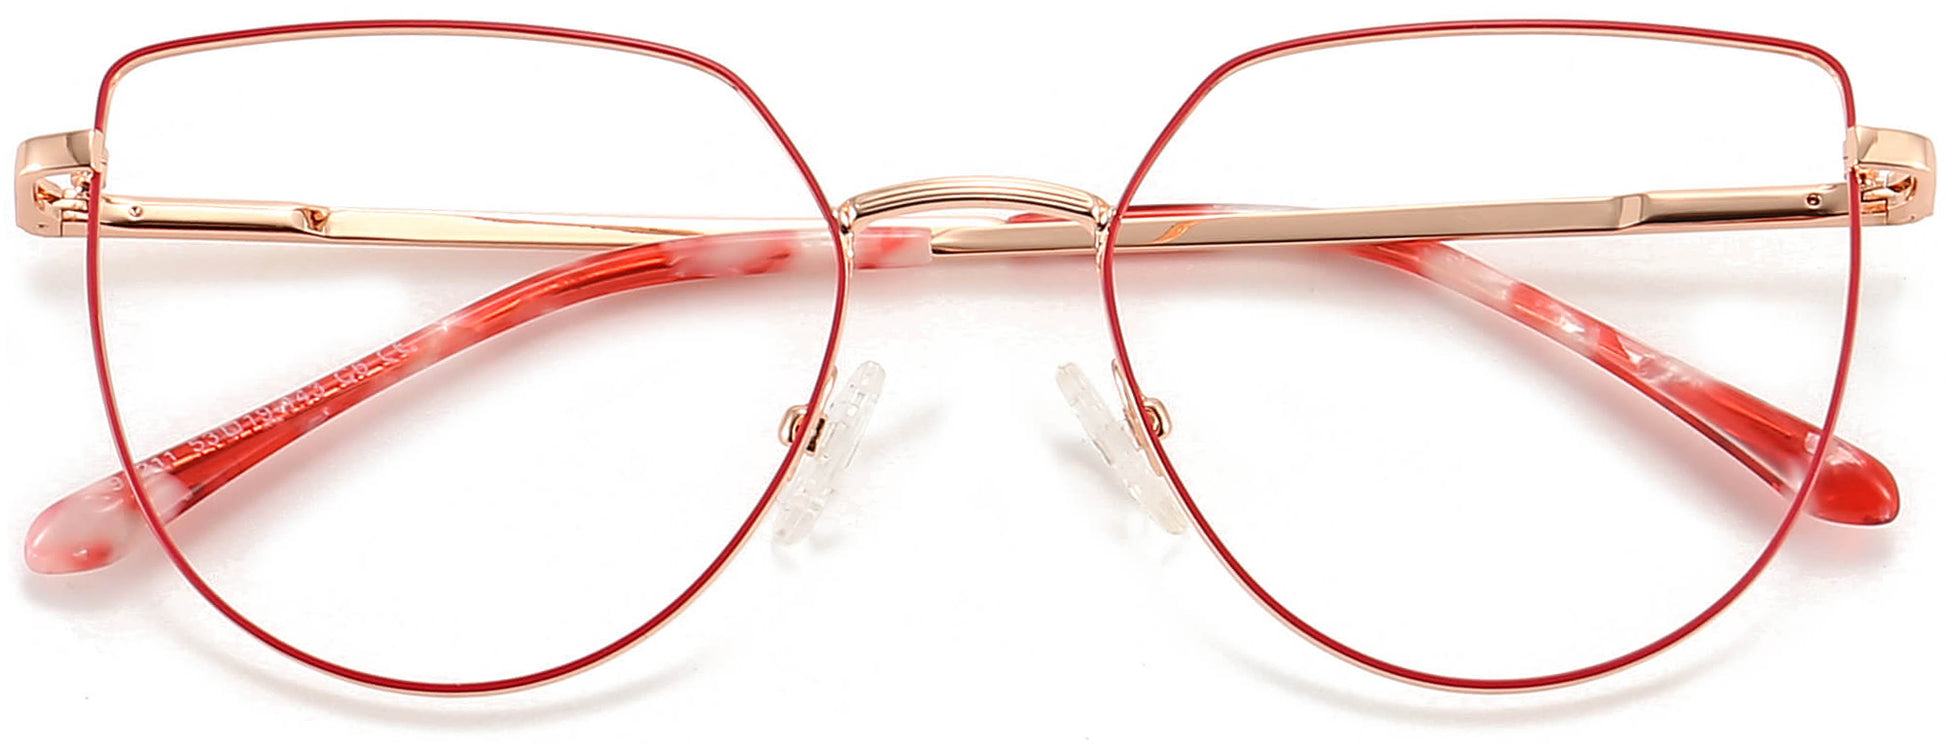 Katie Cateye Red Eyeglasses from ANRRI, closed view